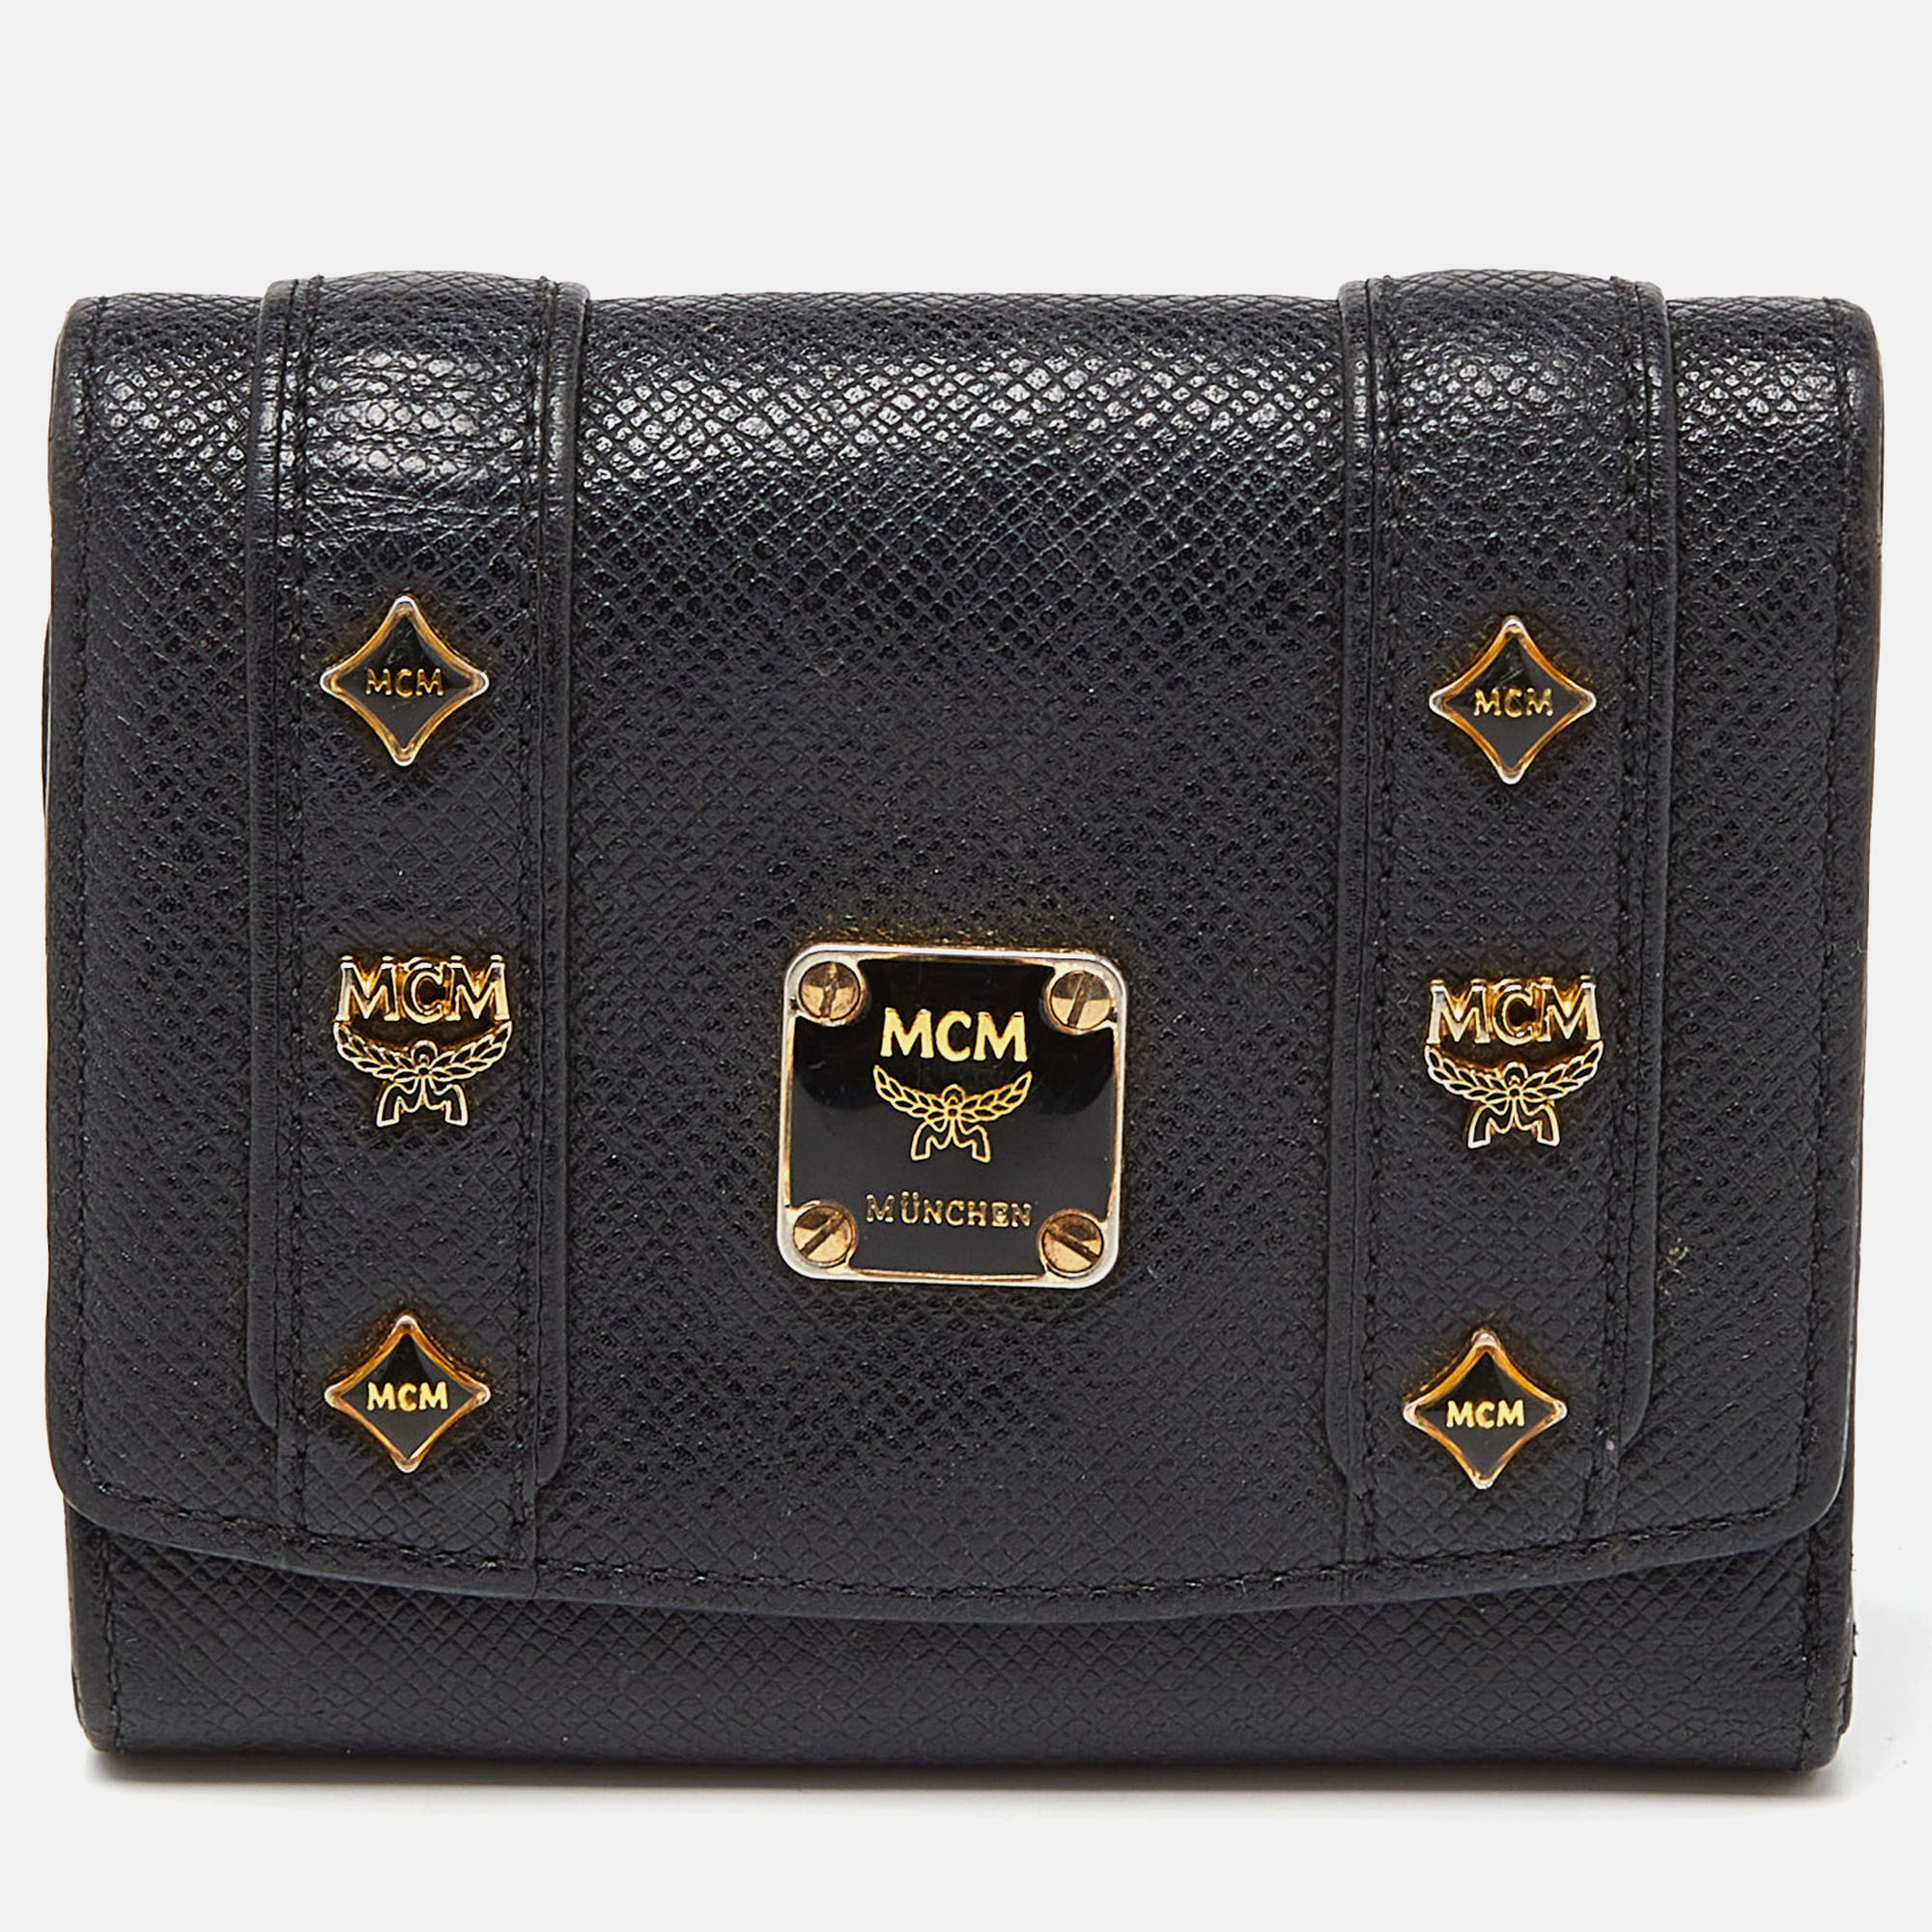 

MCM Black Leather Studded Charm Trifold Wallet